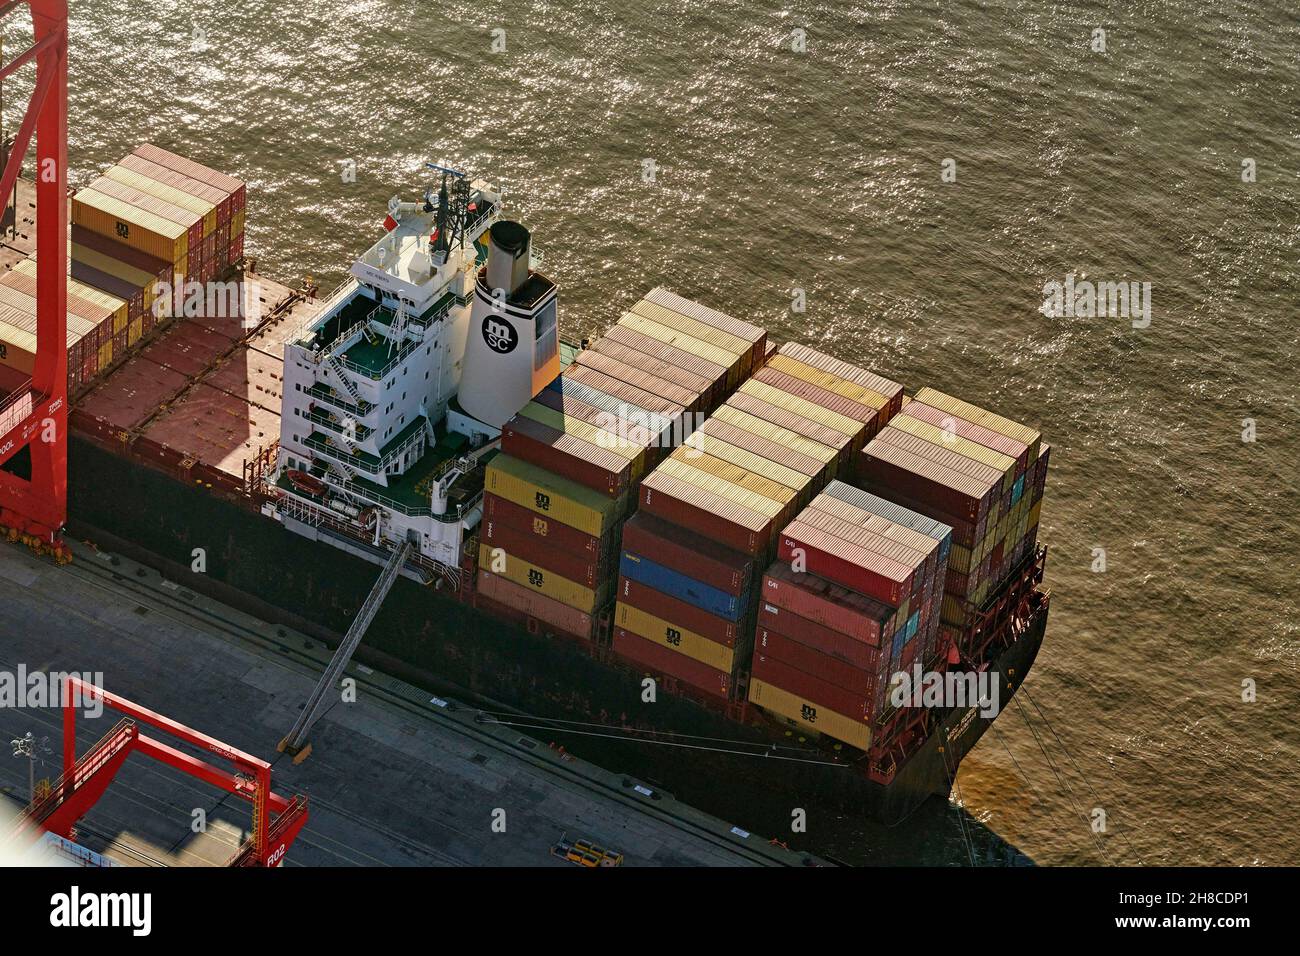 An overhead view of containers on shipping, River Mersey, Liverpool Docks, North West England, UK Stock Photo